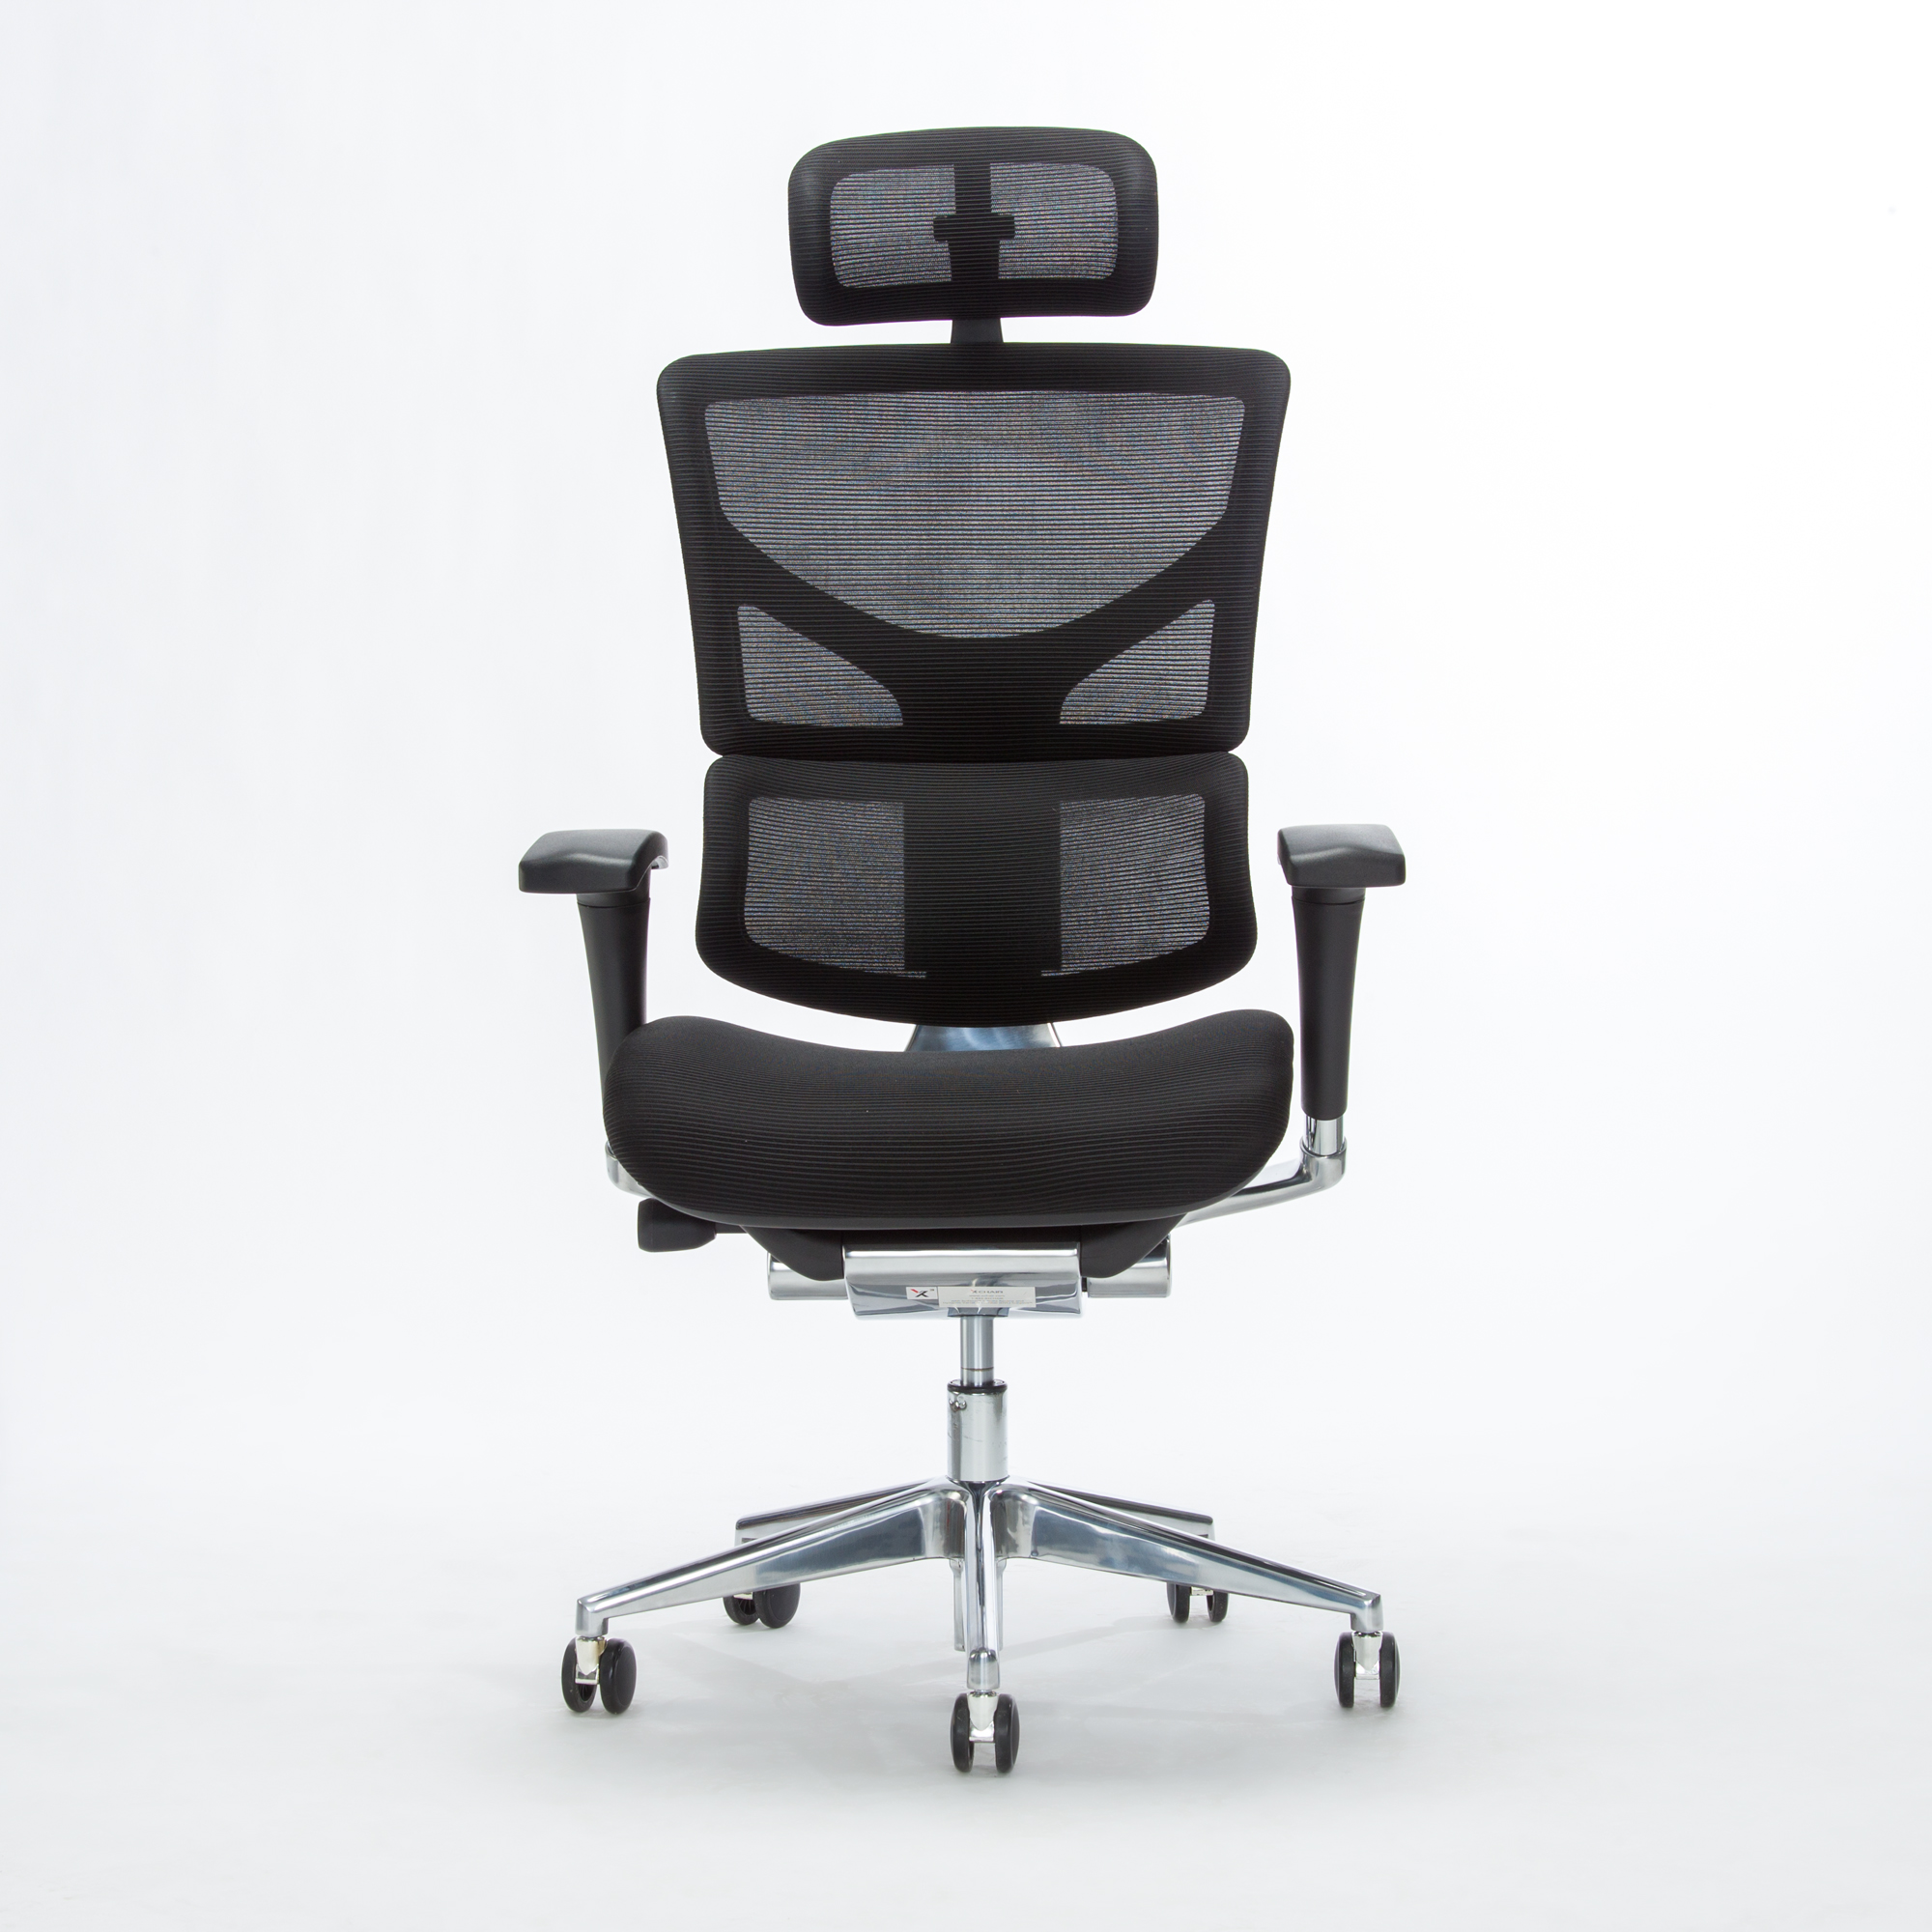 X-Chair X3 Management Desk Chair: Quite Possibly the Most Comfortable